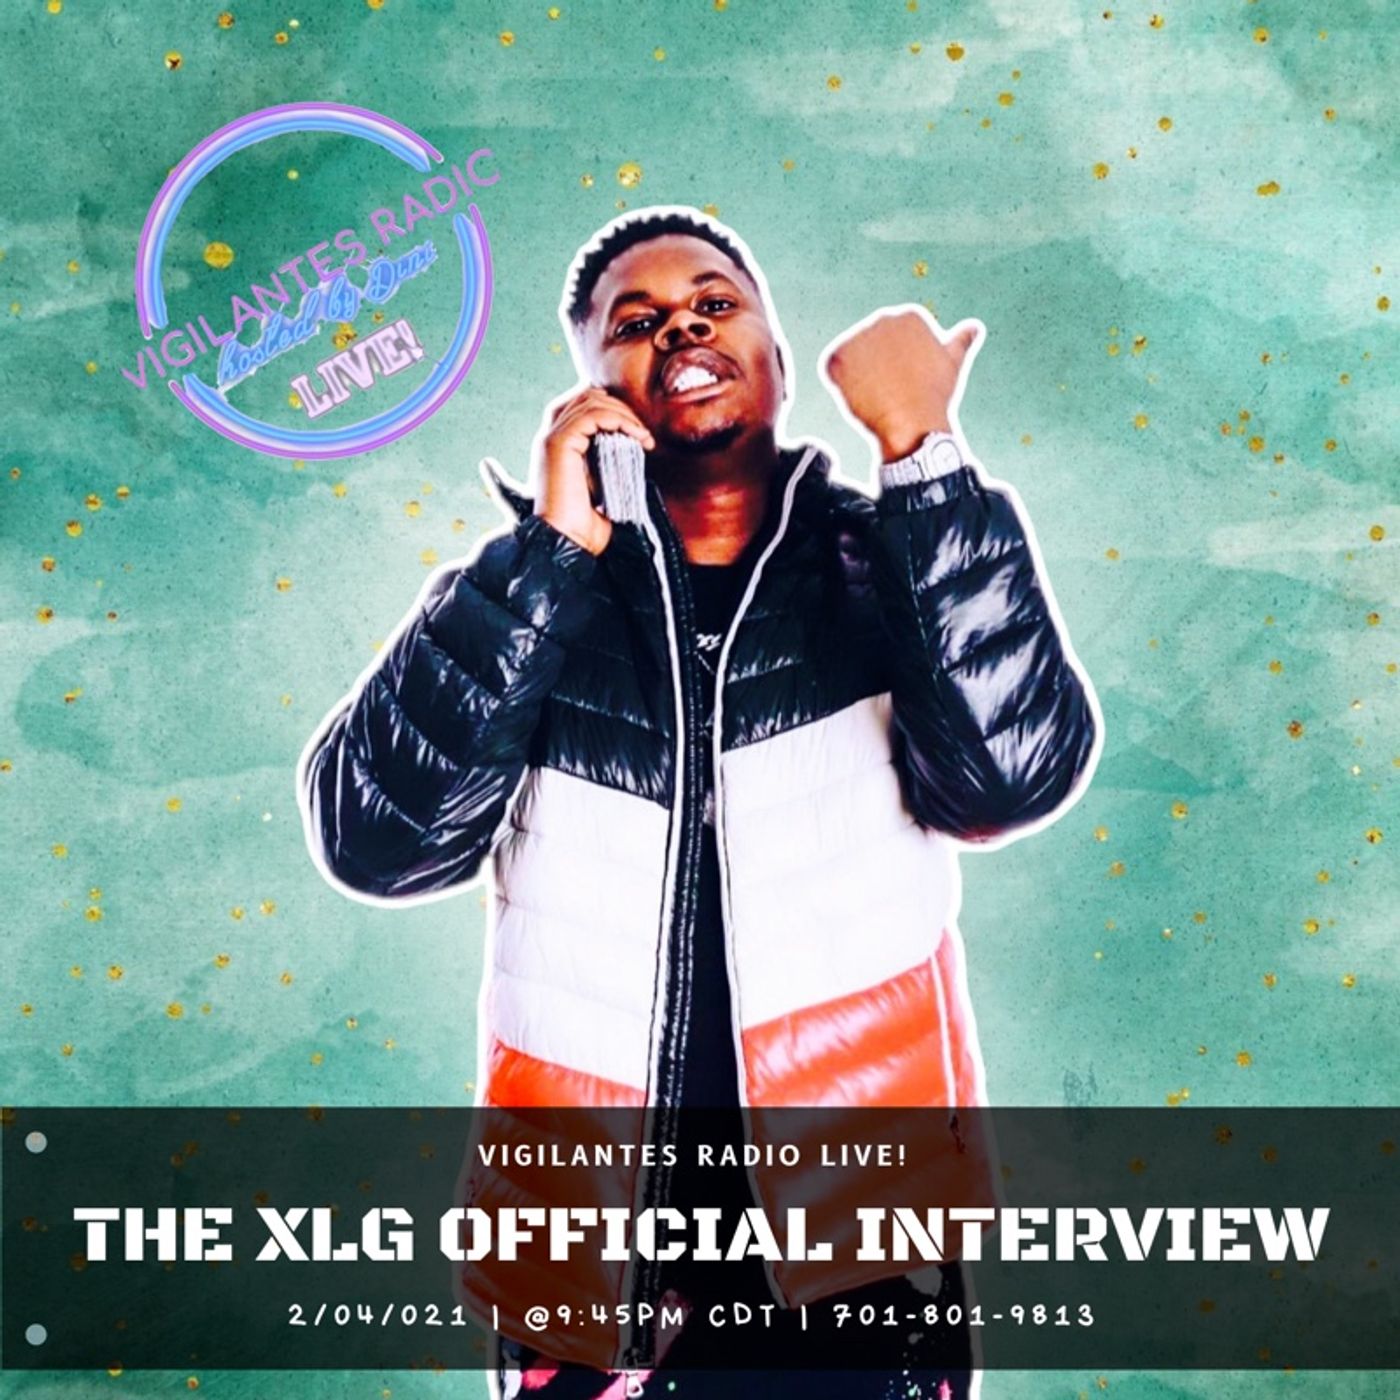 The XLG Official Interview. Image